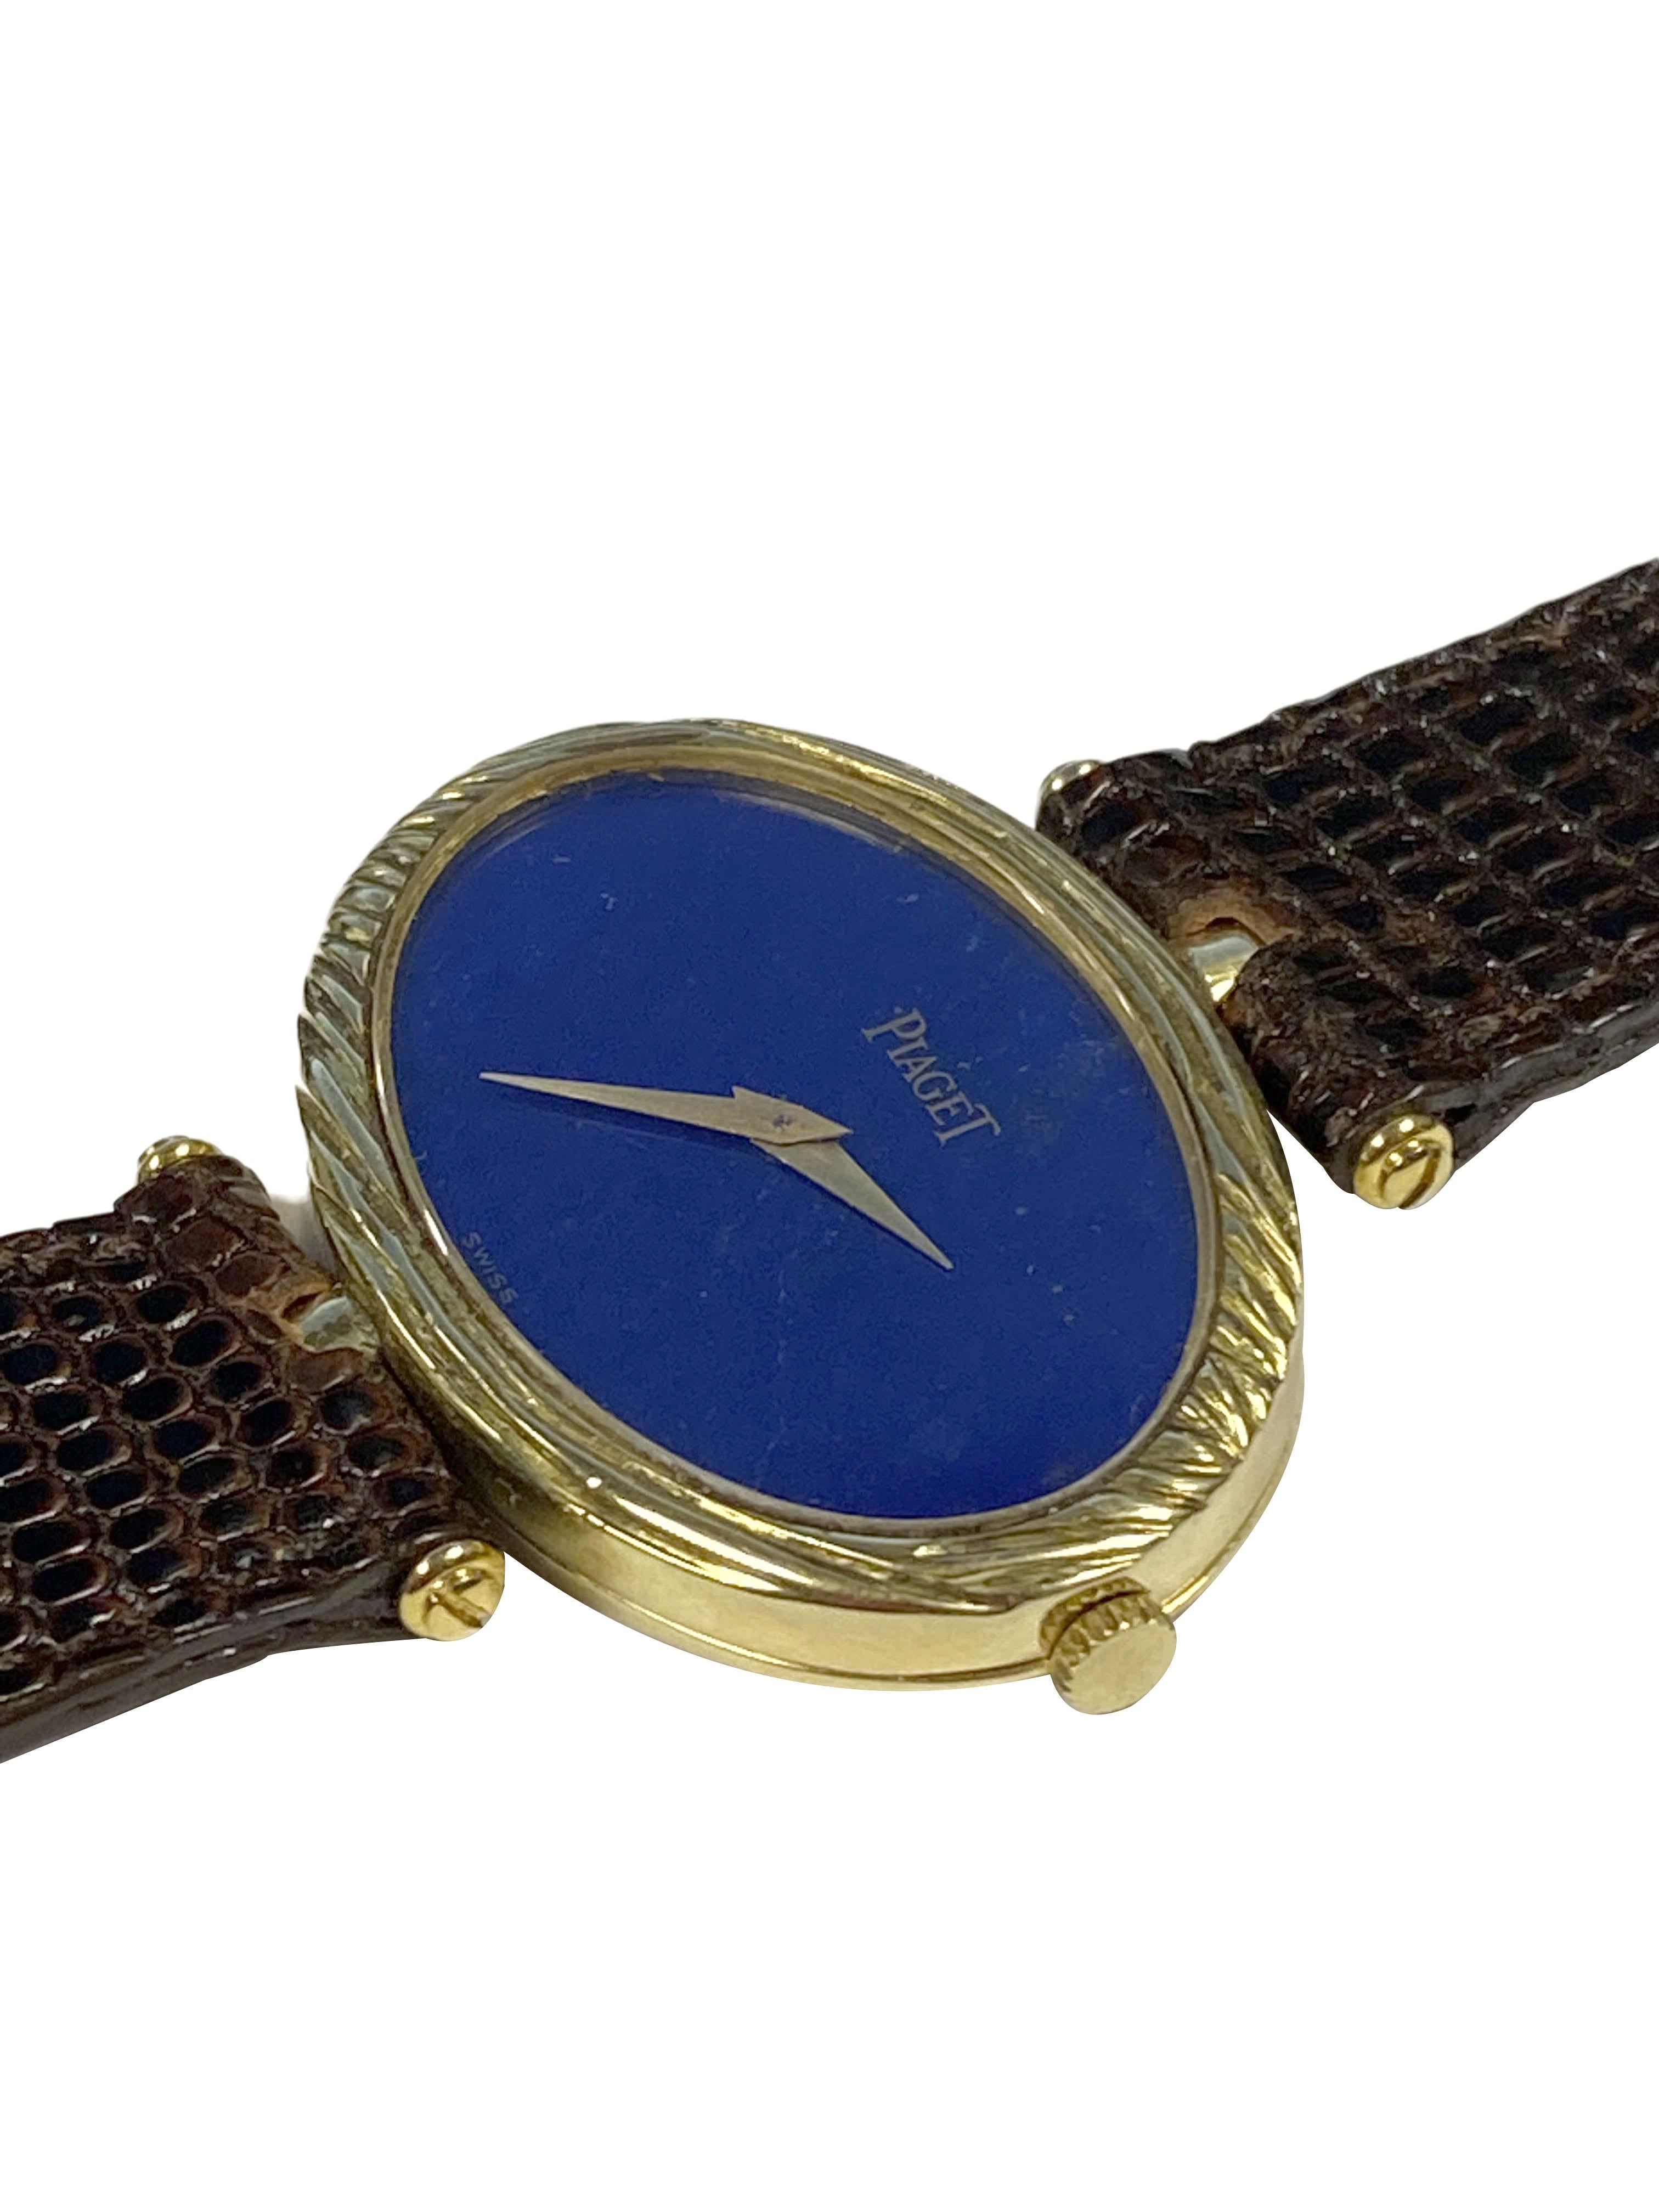 Circa 1970s Piaget Ladies Wrist Watch, 18k Yellow Gold 2 Piece oval case with Textured bezel measuring 34 X 23 M.M. 17 Jewel, mechanical, Manual wind movement. Lapis Lazuli Dial with Gold hands. New Brown Lizard Strap. Recently serviced and comes